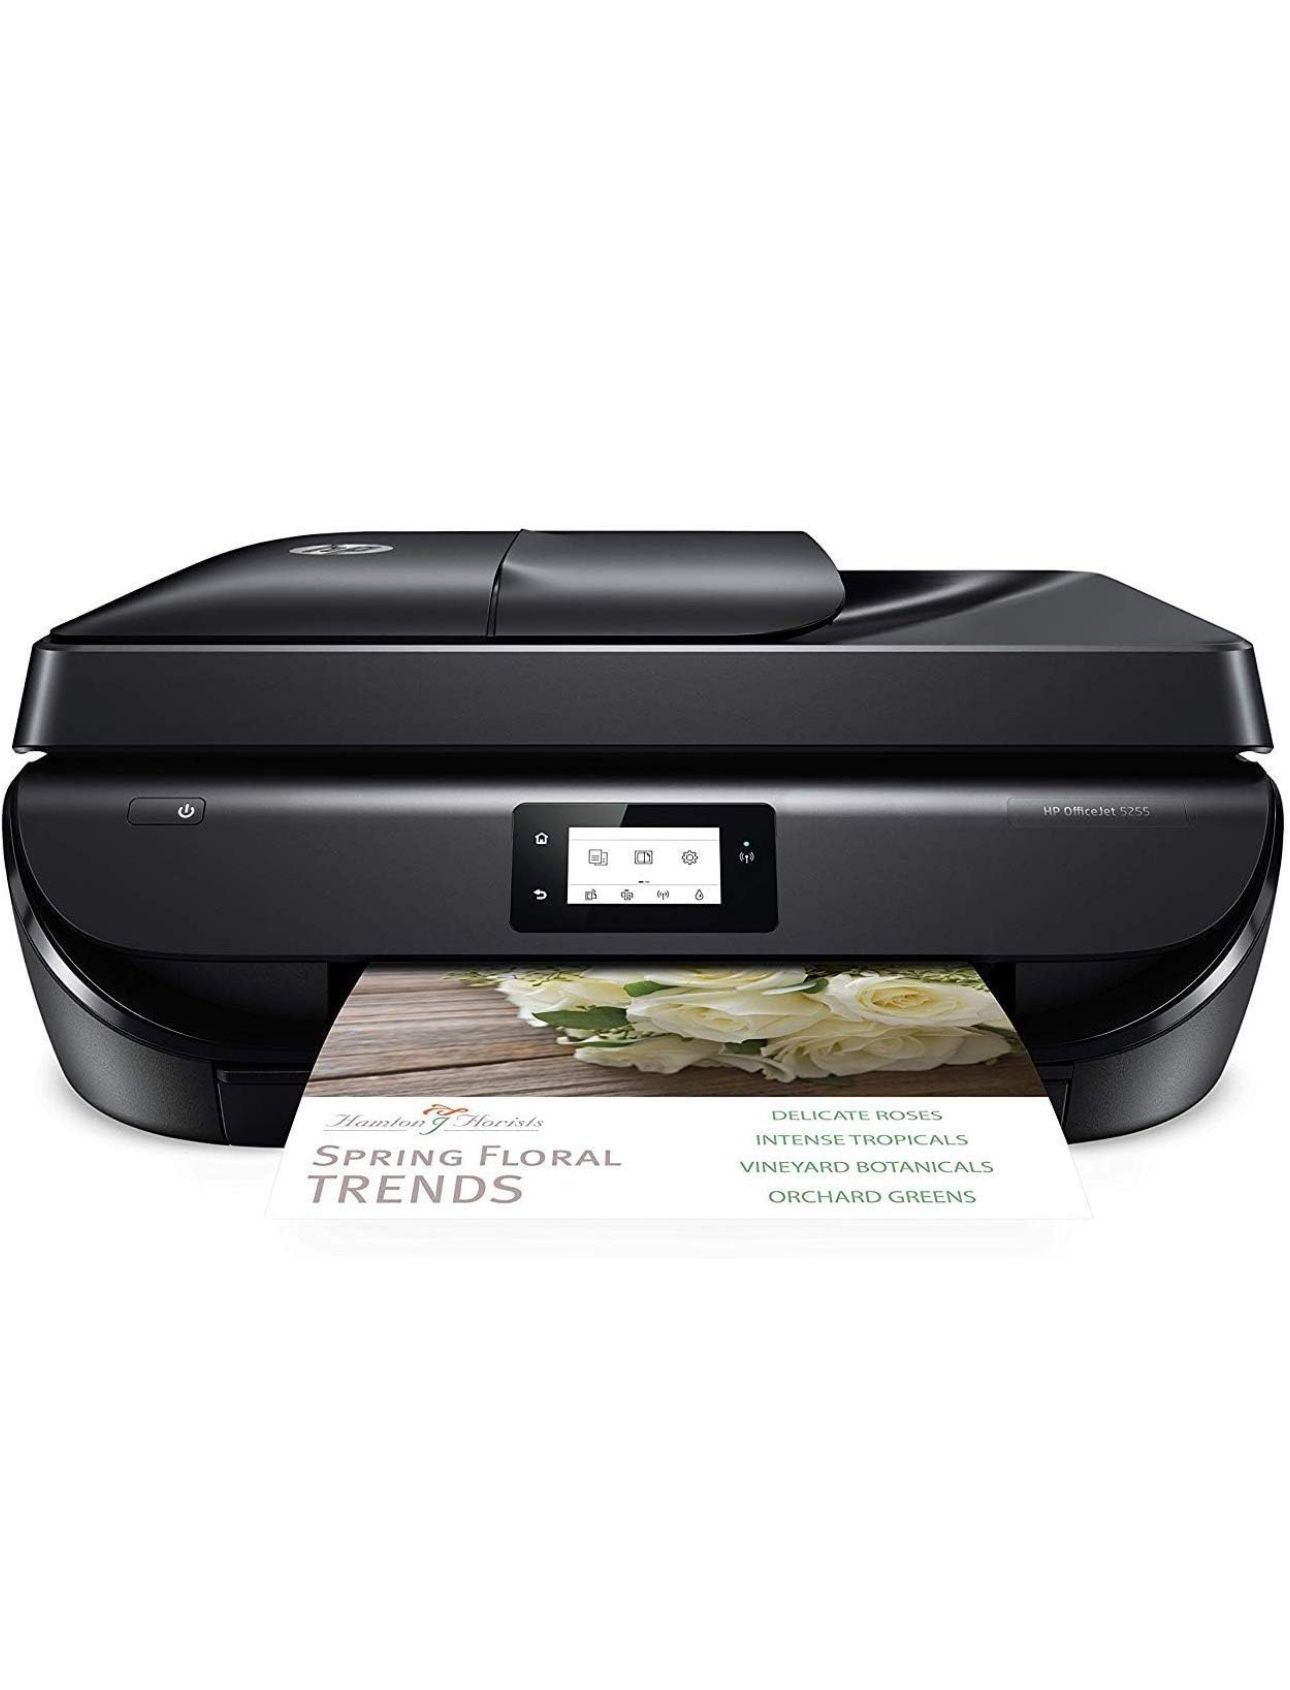 HP OfficeJet 5255 Wireless All-in-One Color Printer